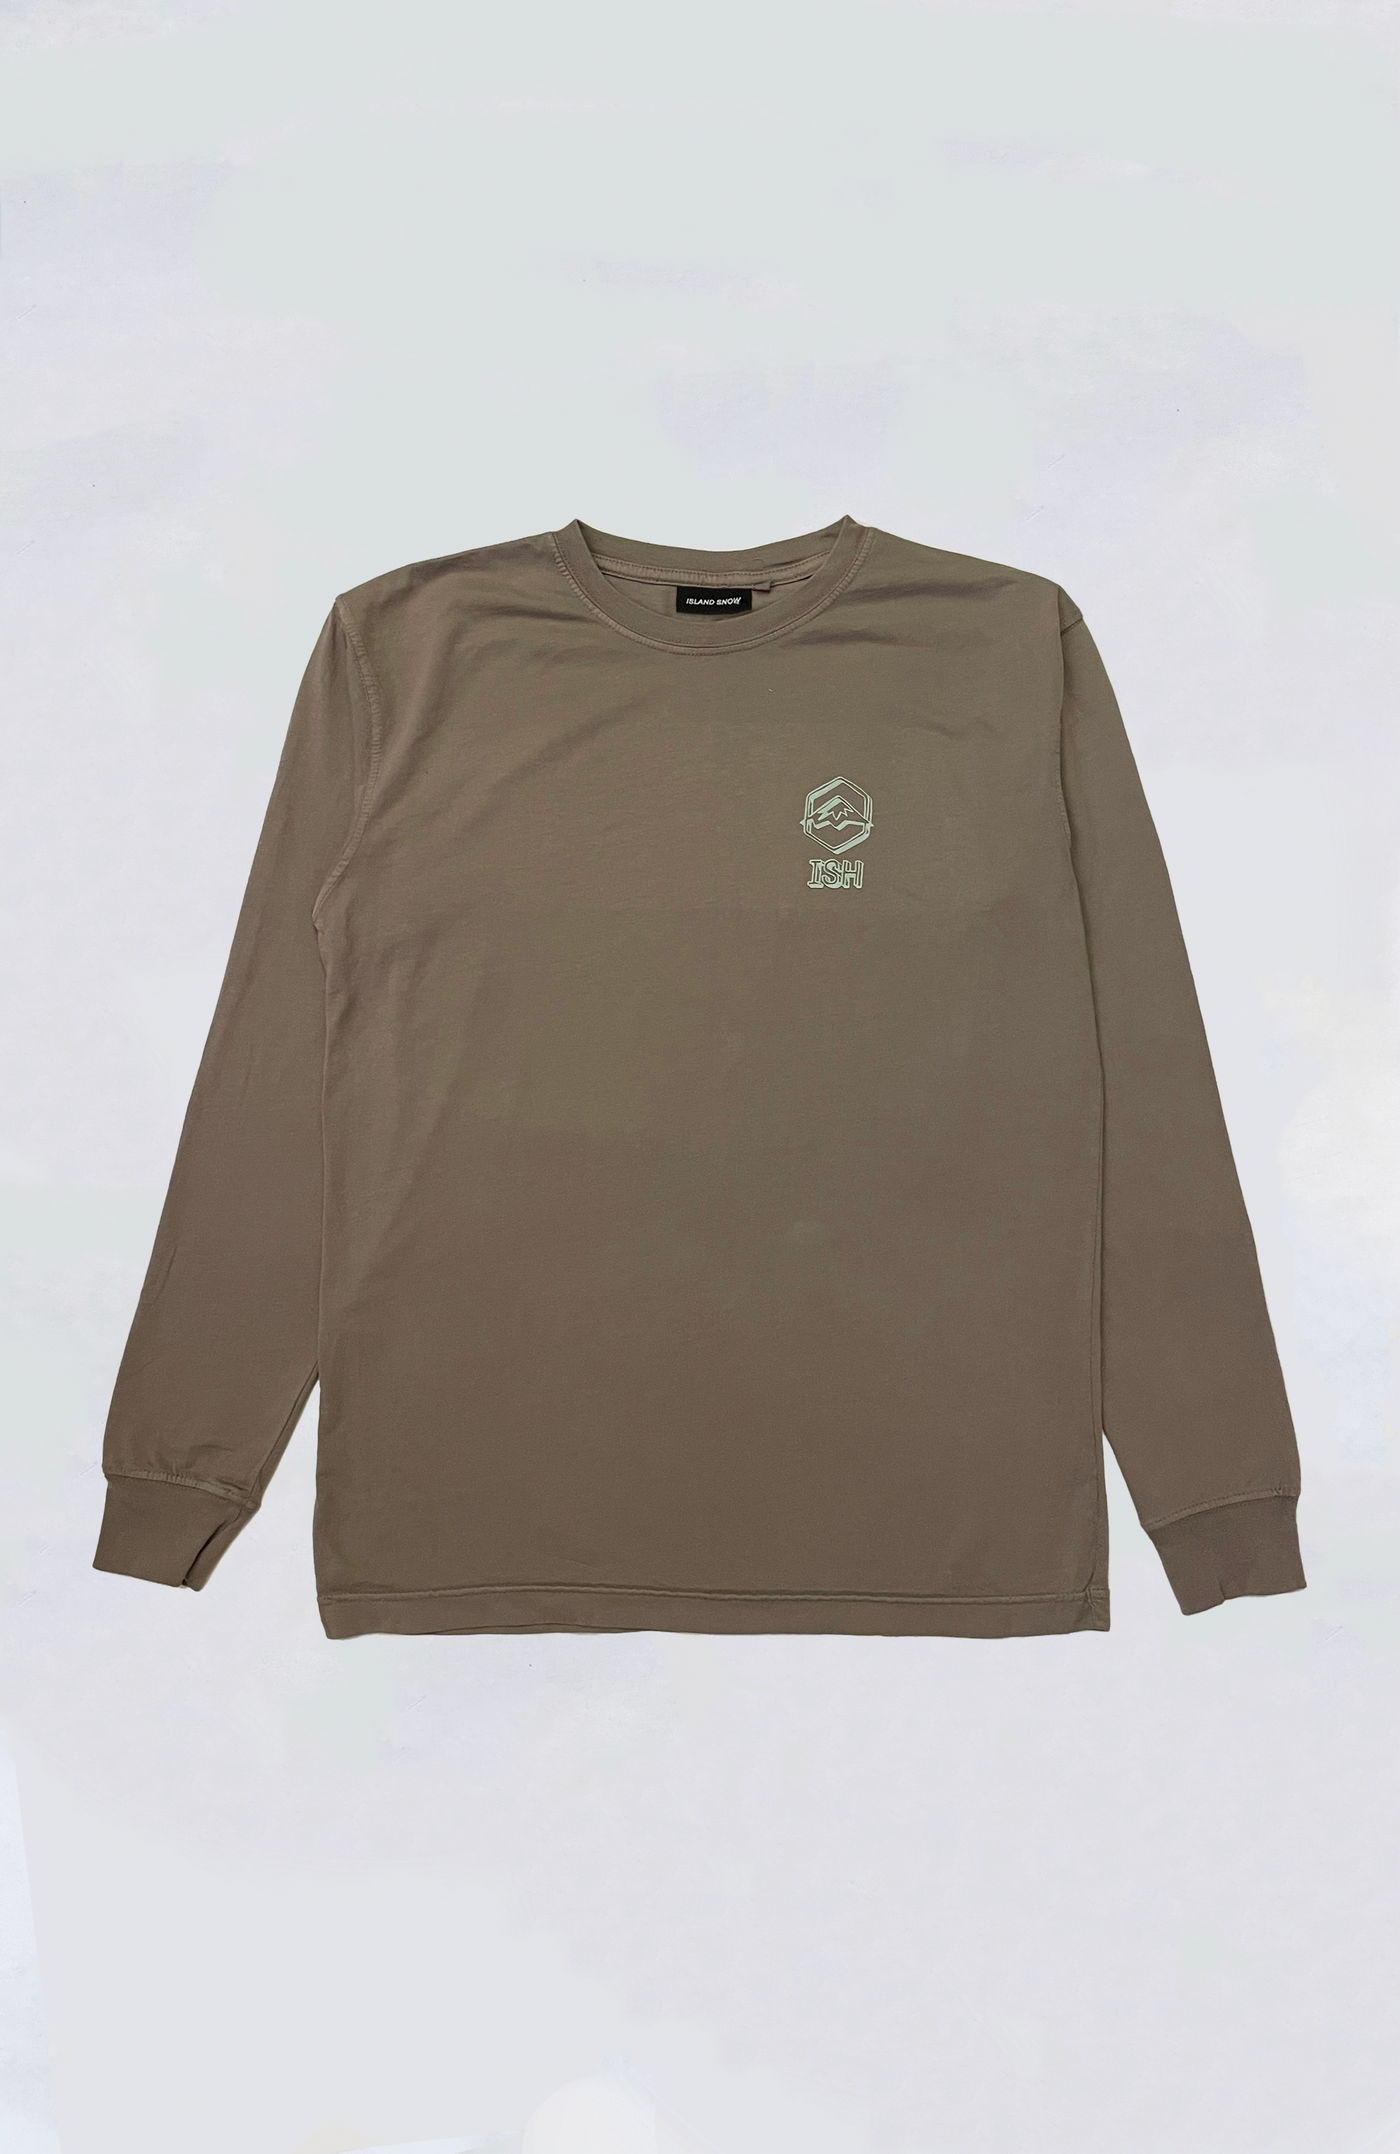 Island Snow Hawaii - IS Hex Sketch Garment Dyed L/S Tee